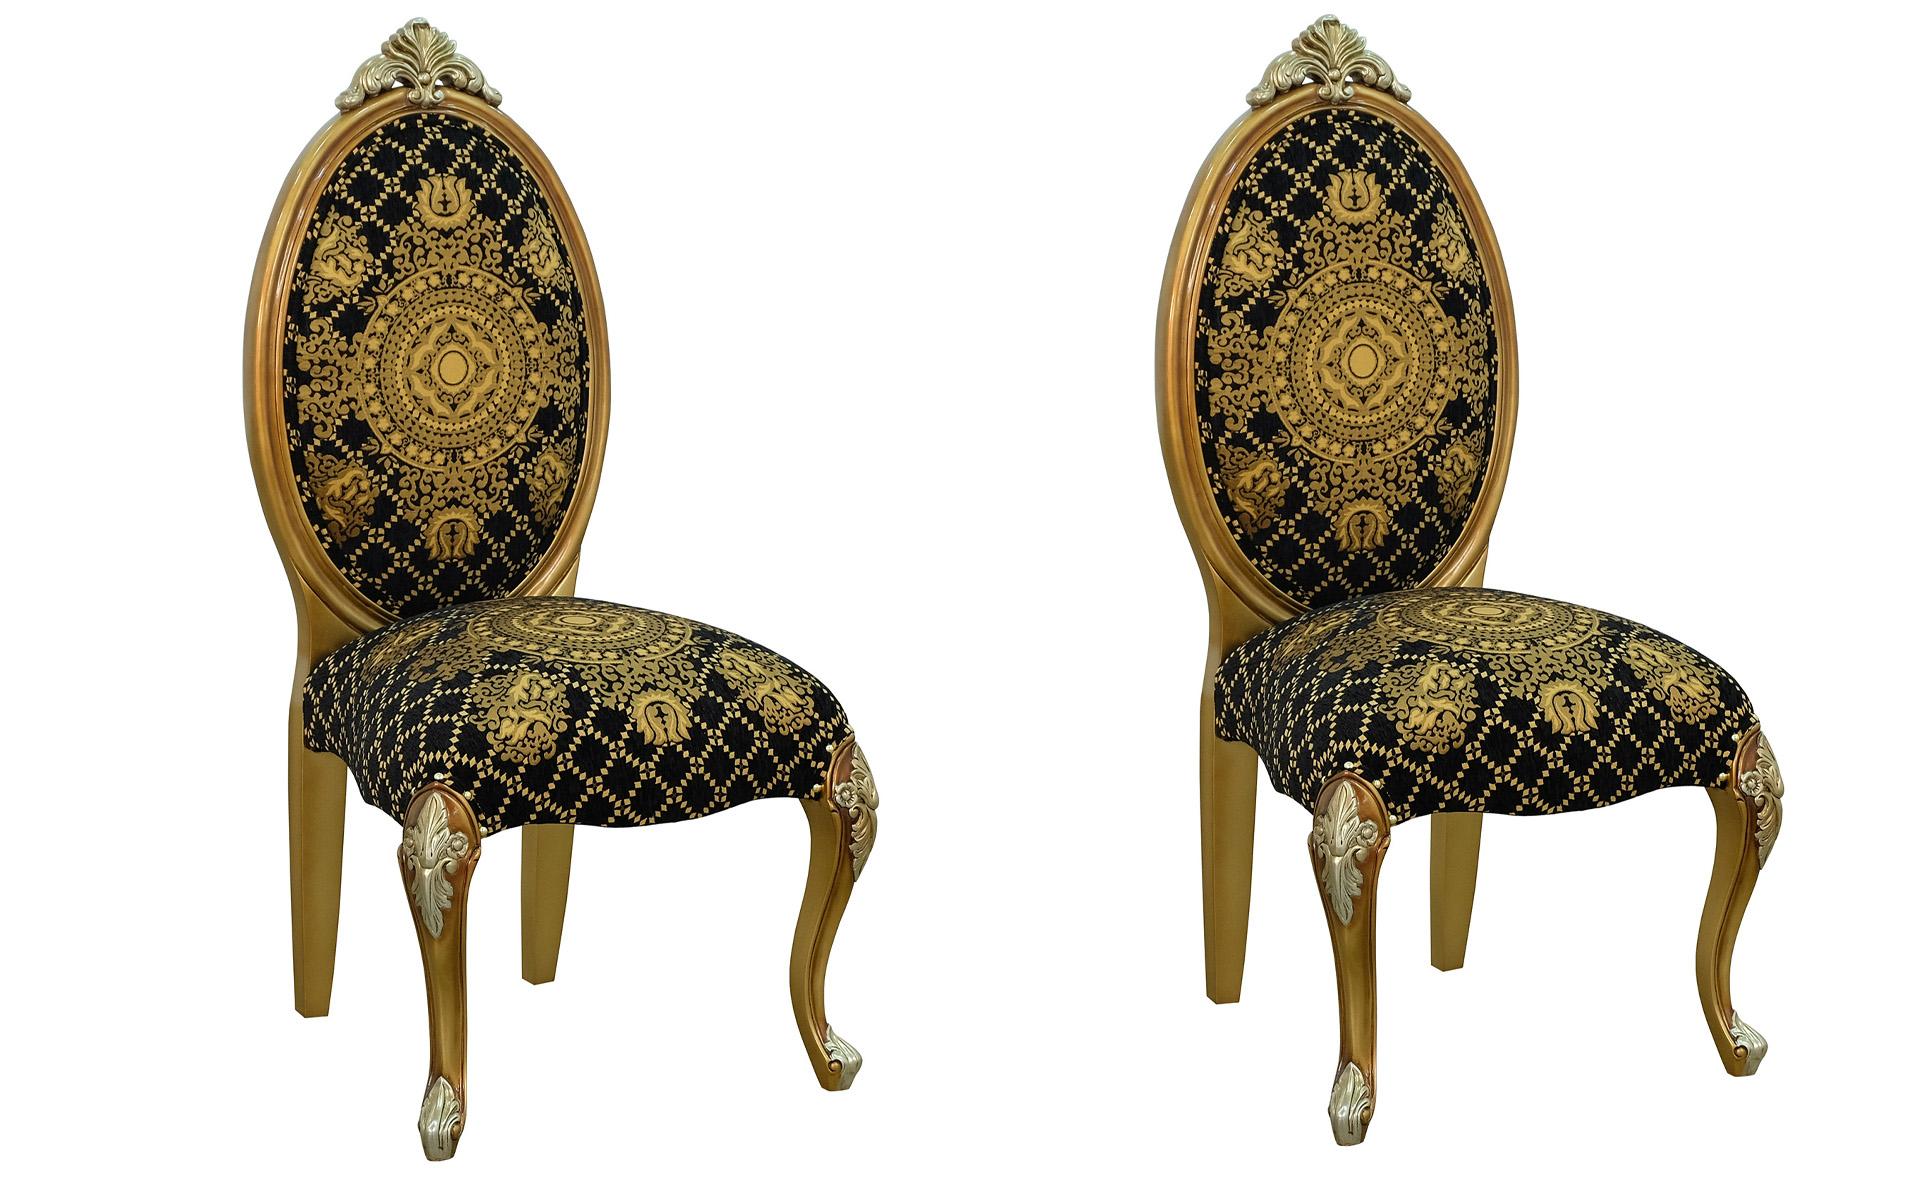 Classic, Traditional Dining Chair Set EMPERADOR 42034-SC-Set-2 in Silver, Gold, Black Fabric